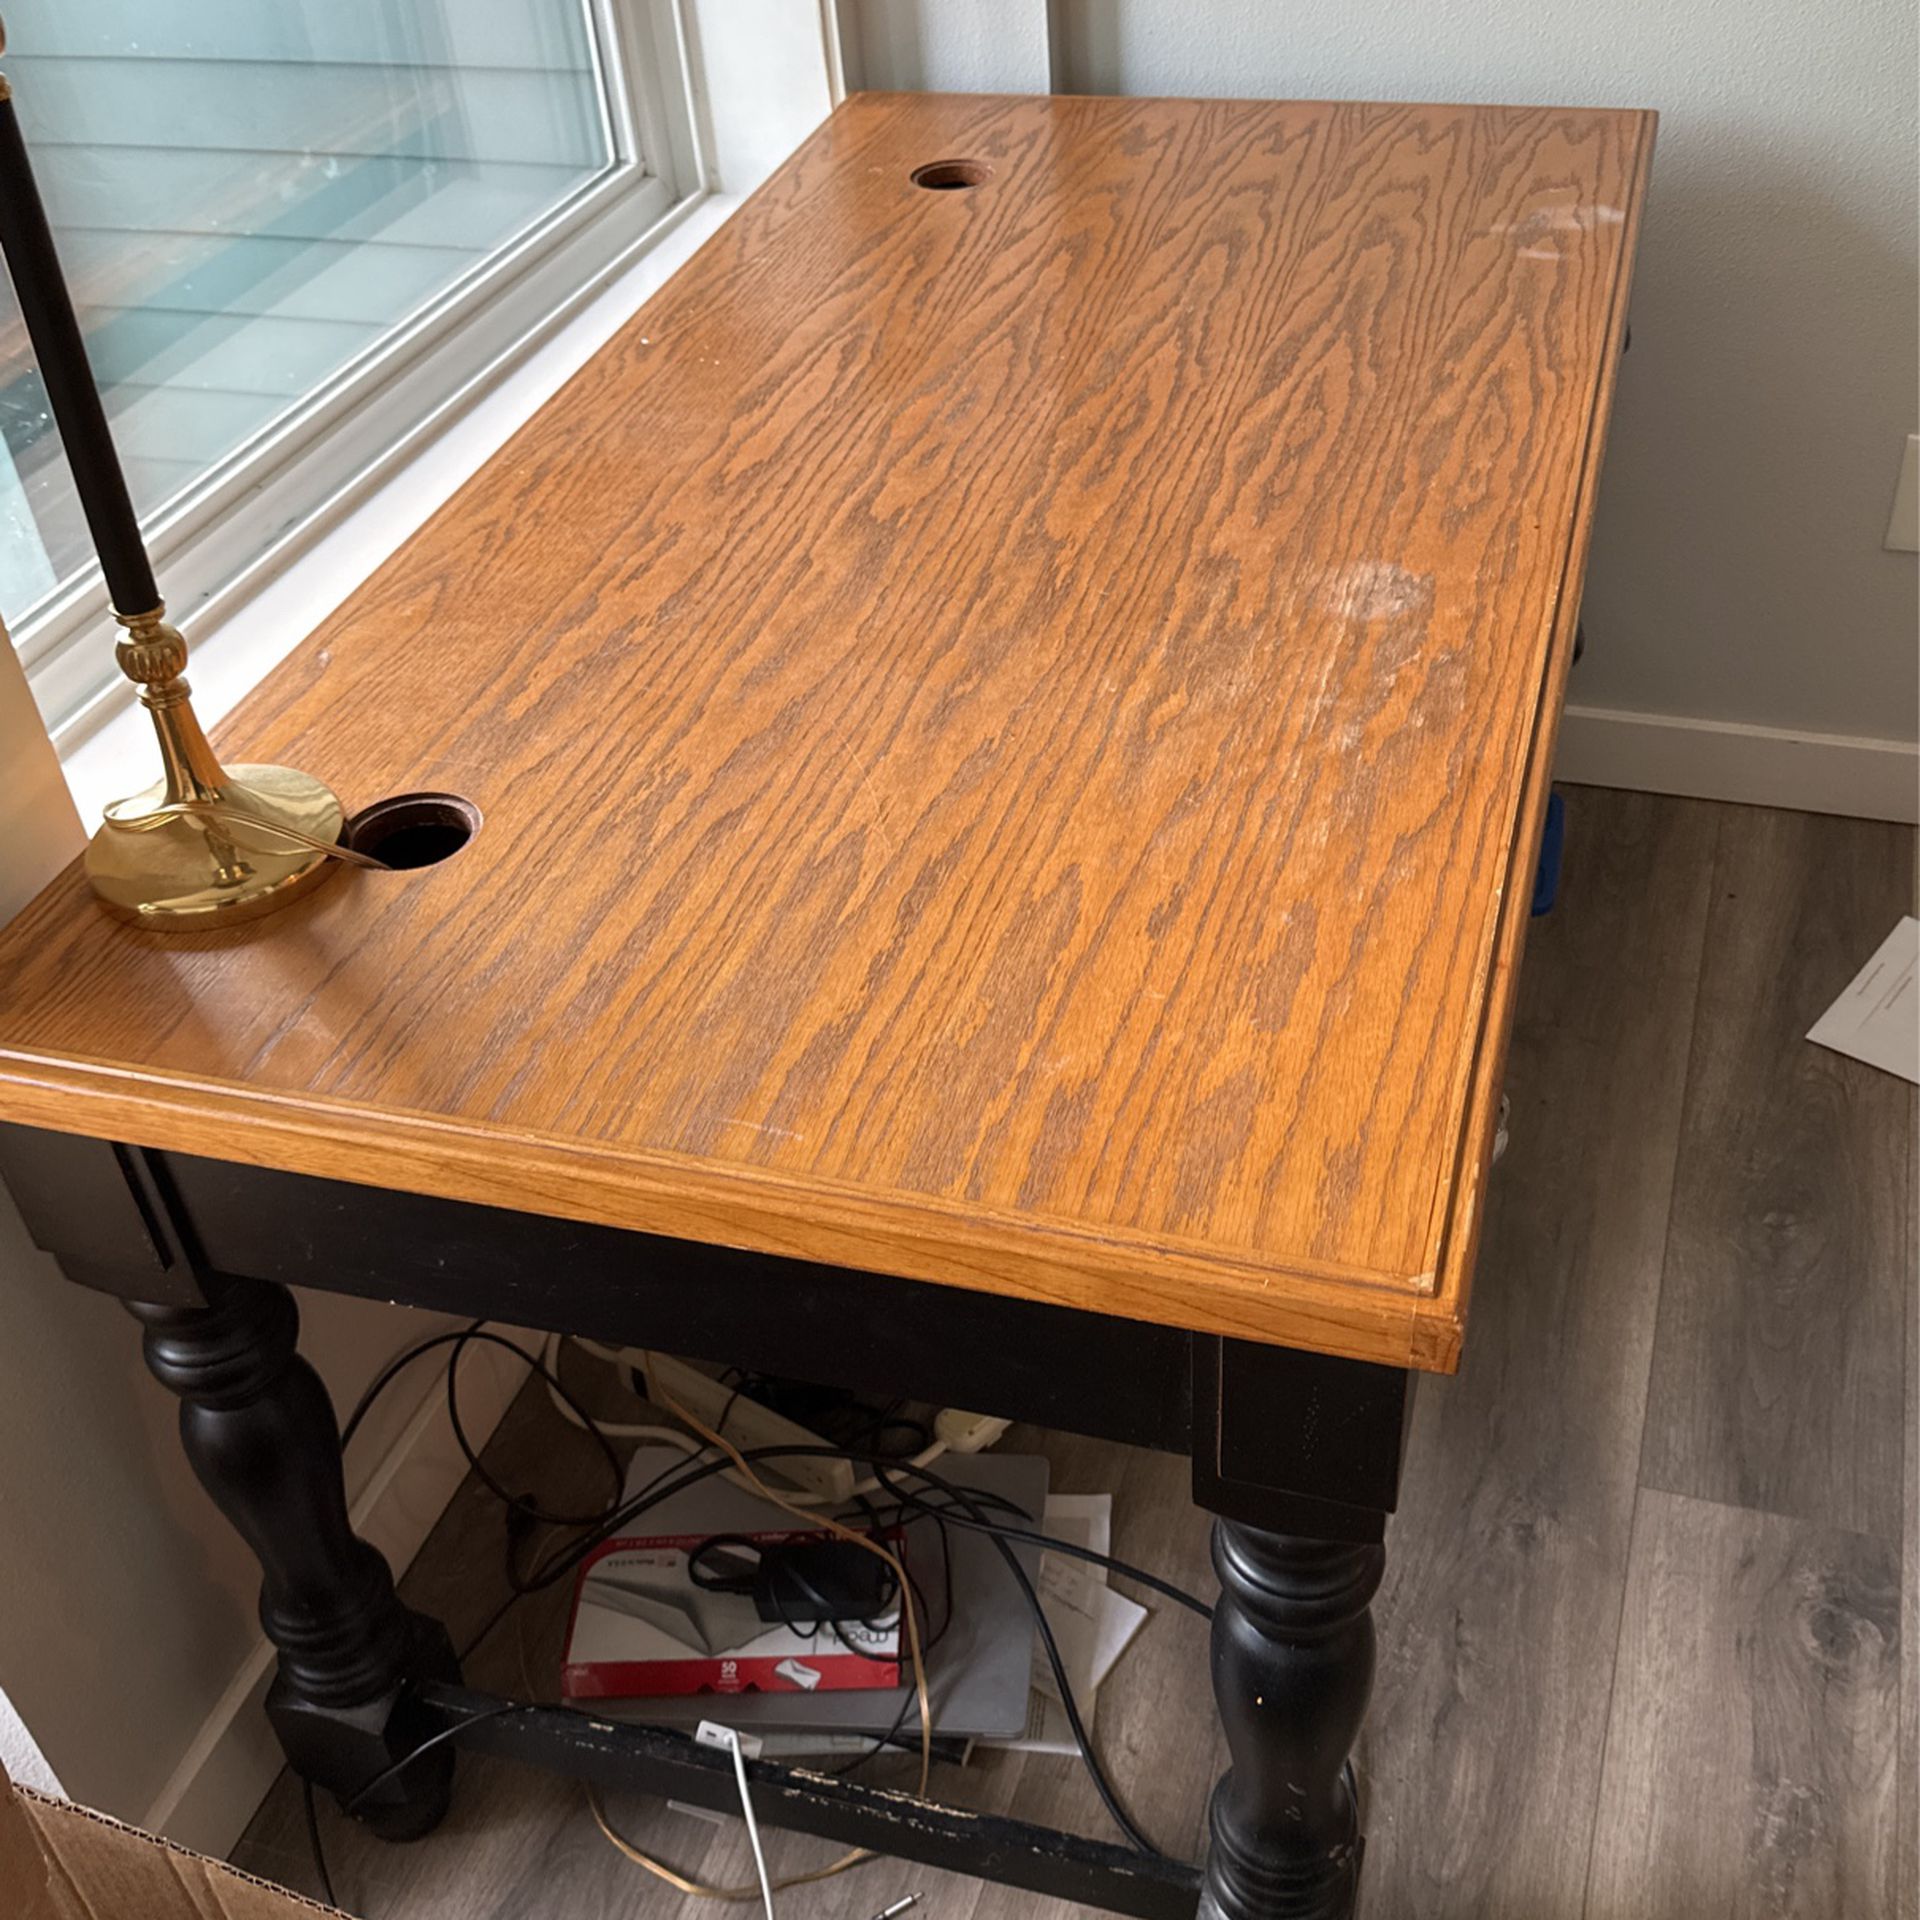 Solid Wooden Table W 2 Lamps For Free Will Pay $100 To Pickup